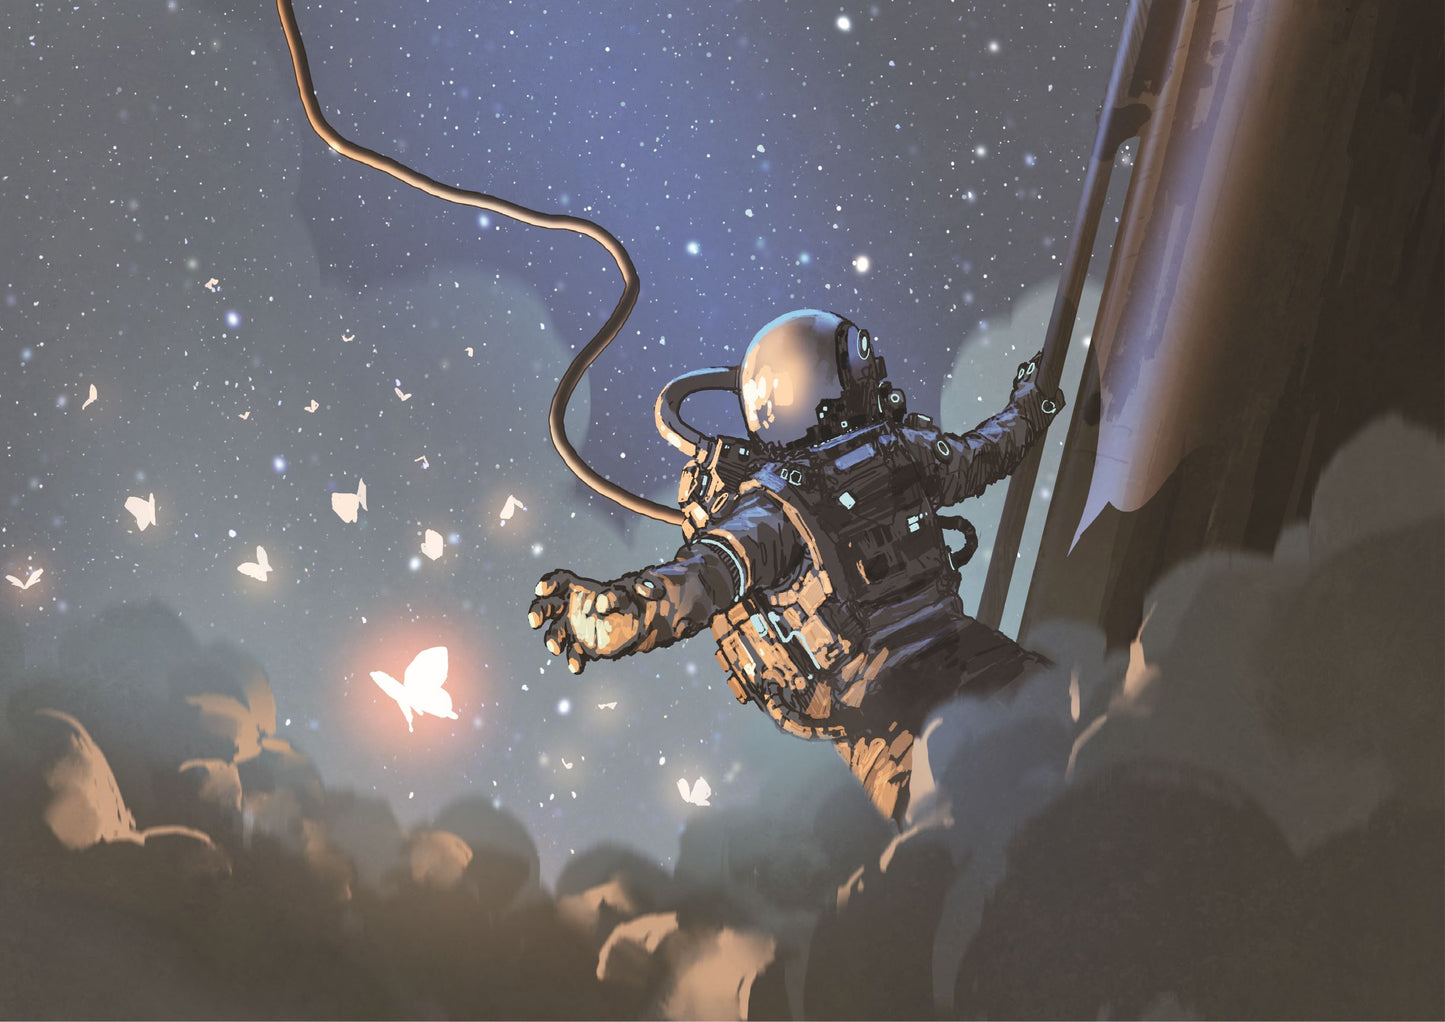 The astronaut reaching out to catch the glowing butterfly in the sky